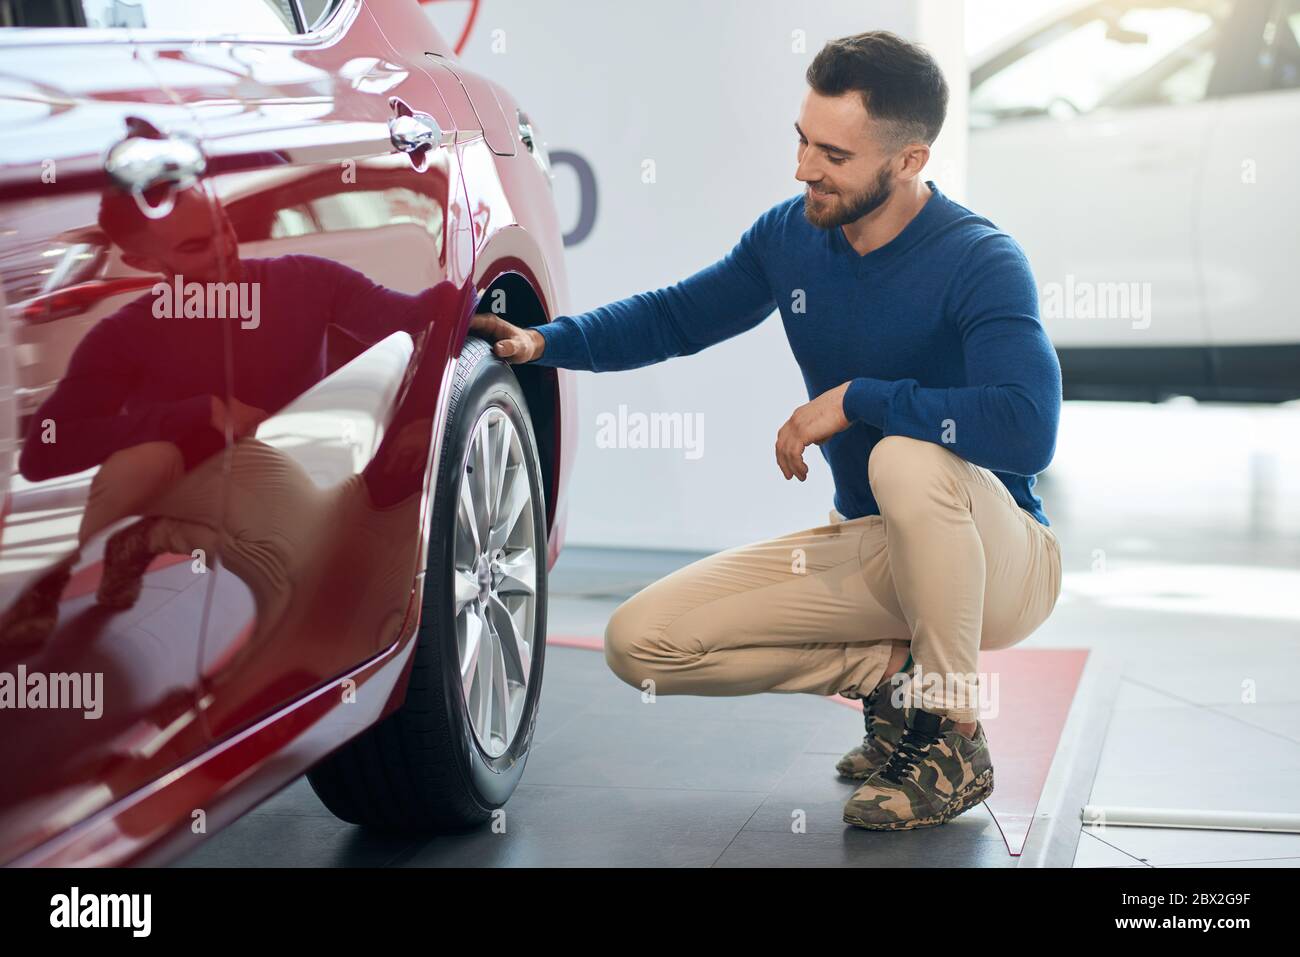 Handsome smiling bearded man sitting down, touching and looking at wheel of red car in dealership. Side view of young customer feeling happy before successful purchase. Stock Photo